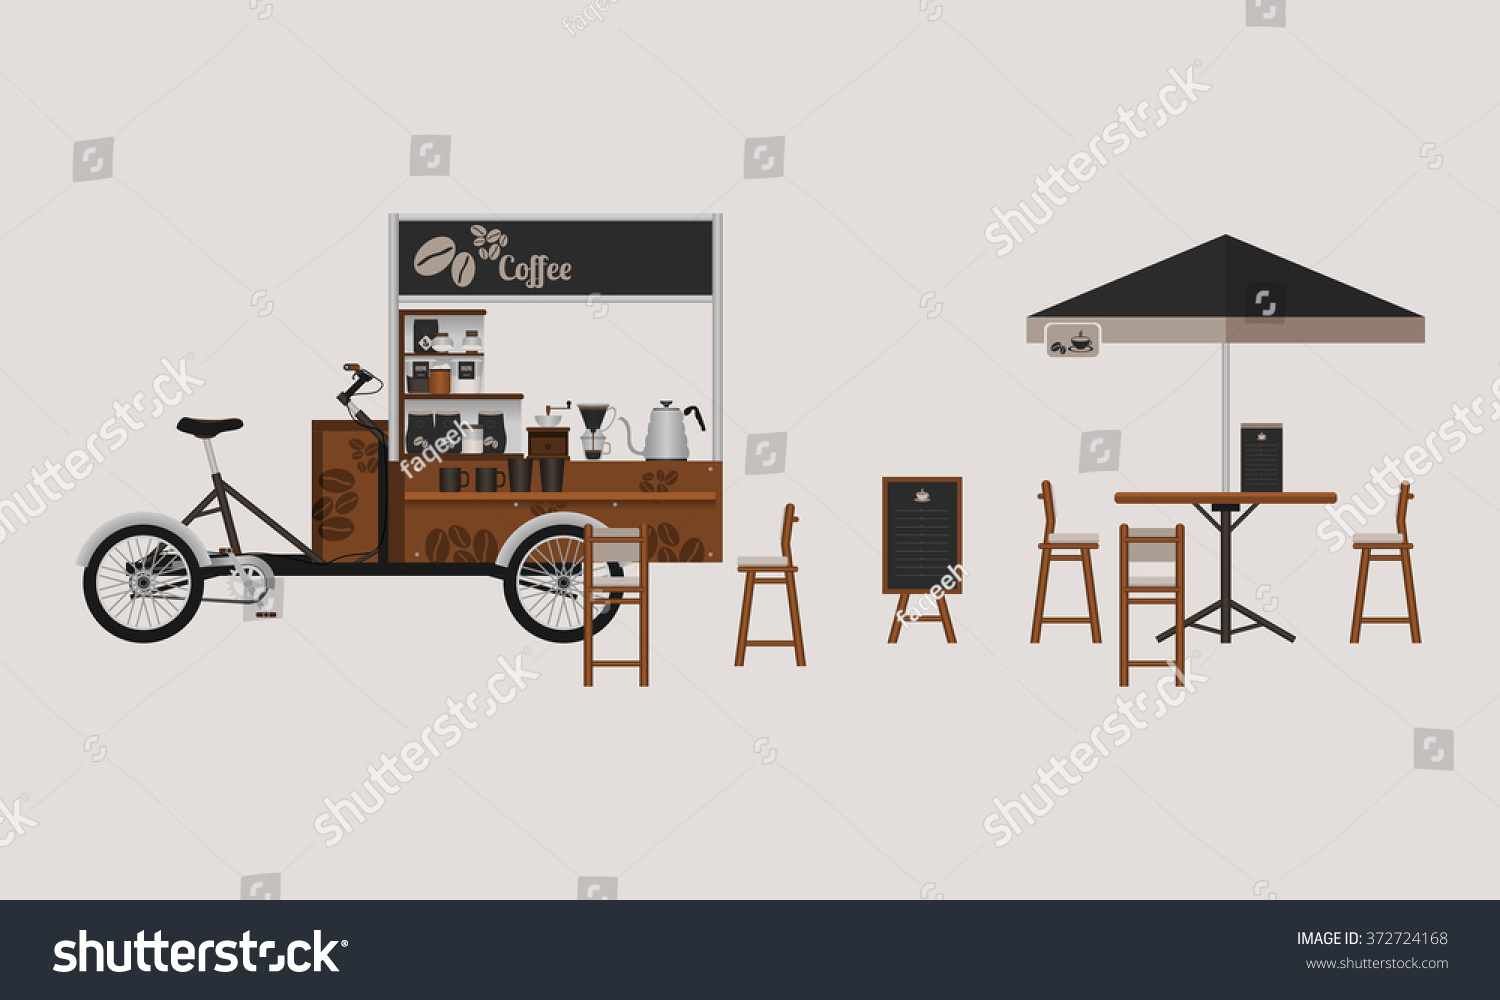 SVG of Detailed Outdoor Bicycle Coffee Stand Vector Illustration with Table, Chairs, Menu Display, and Brewing Equipment for Mobile Shop Concept svg